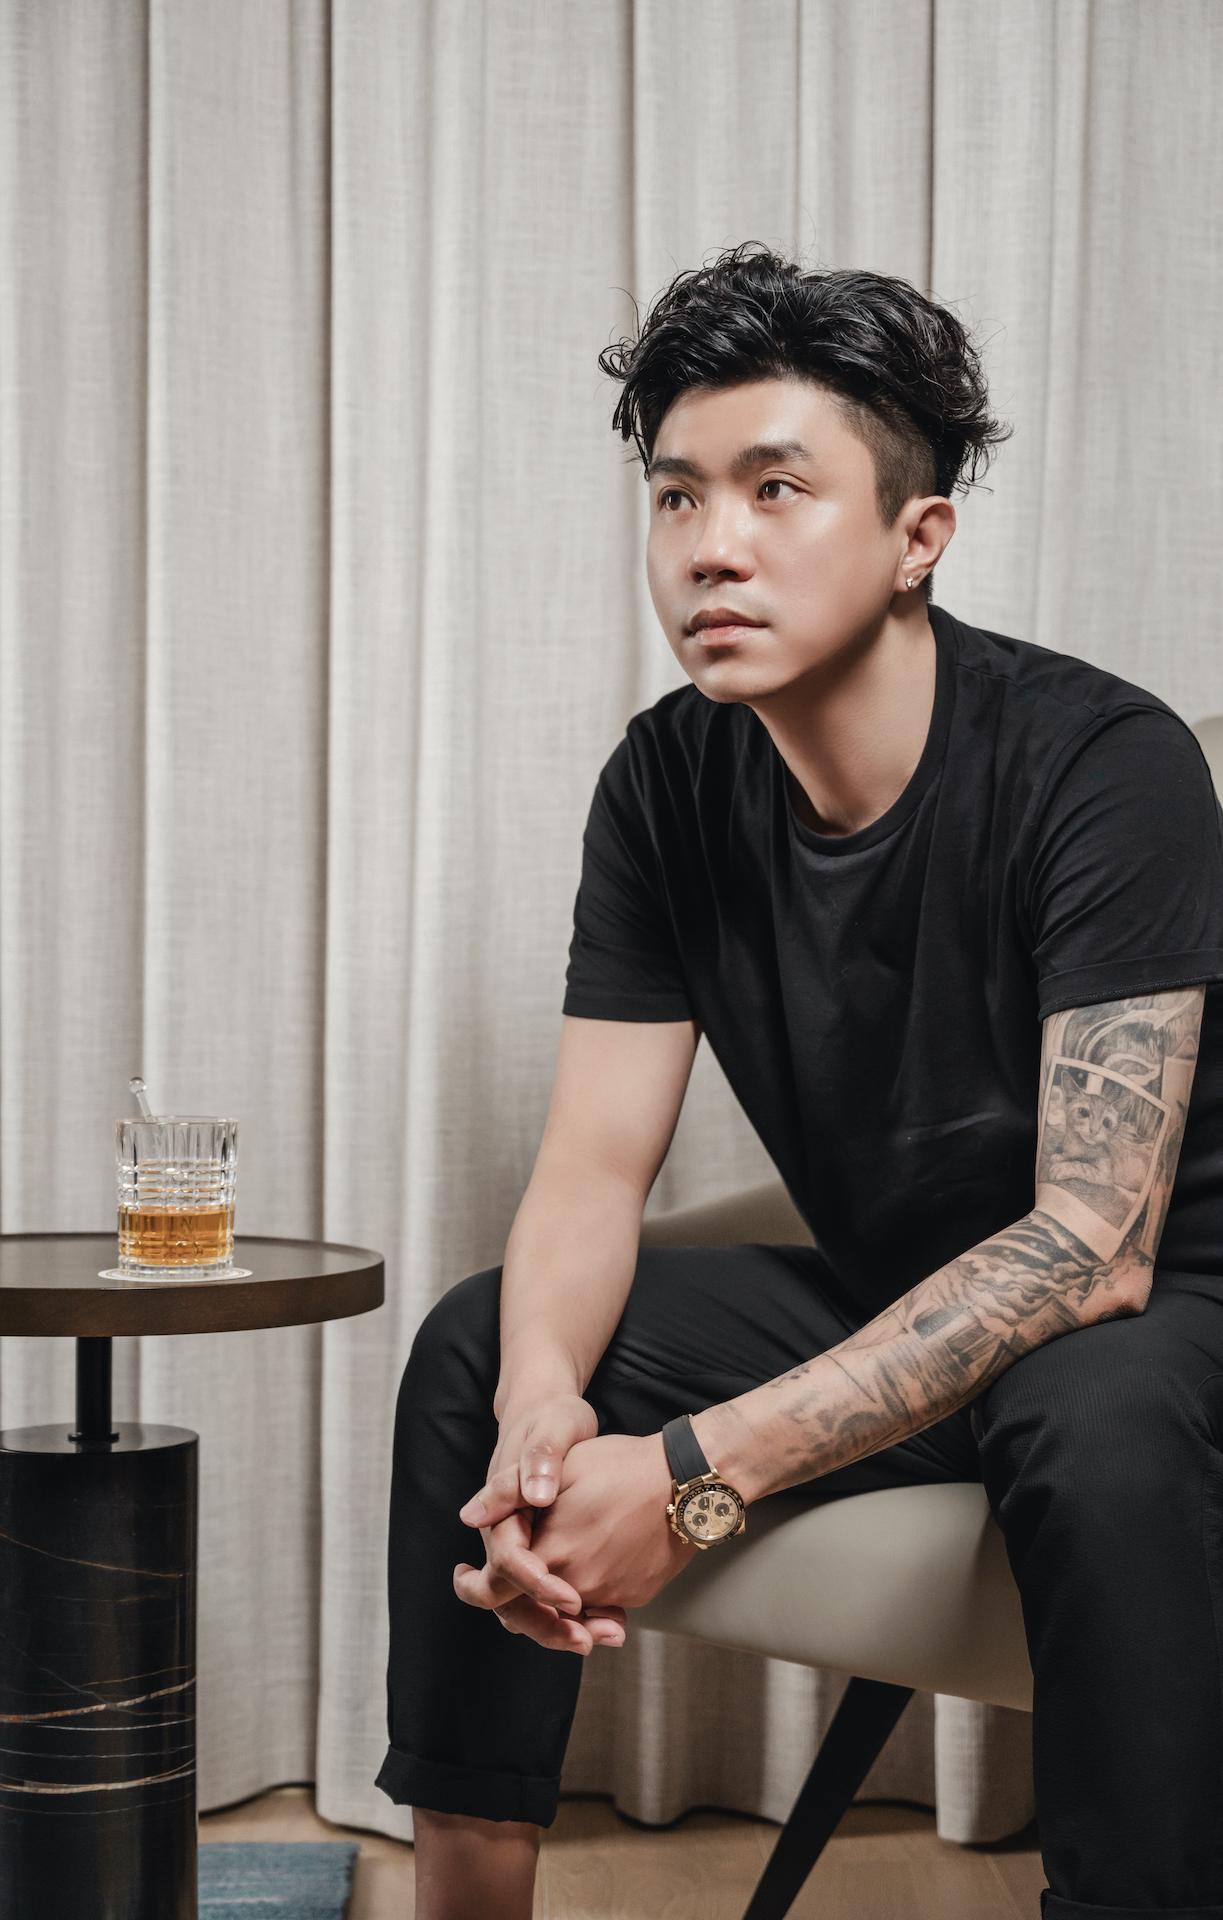 C&I Interior Design Founder Ivan Ho on Creating a Home with Warmth and Elevating Hong Kong’s Interior Design Industry